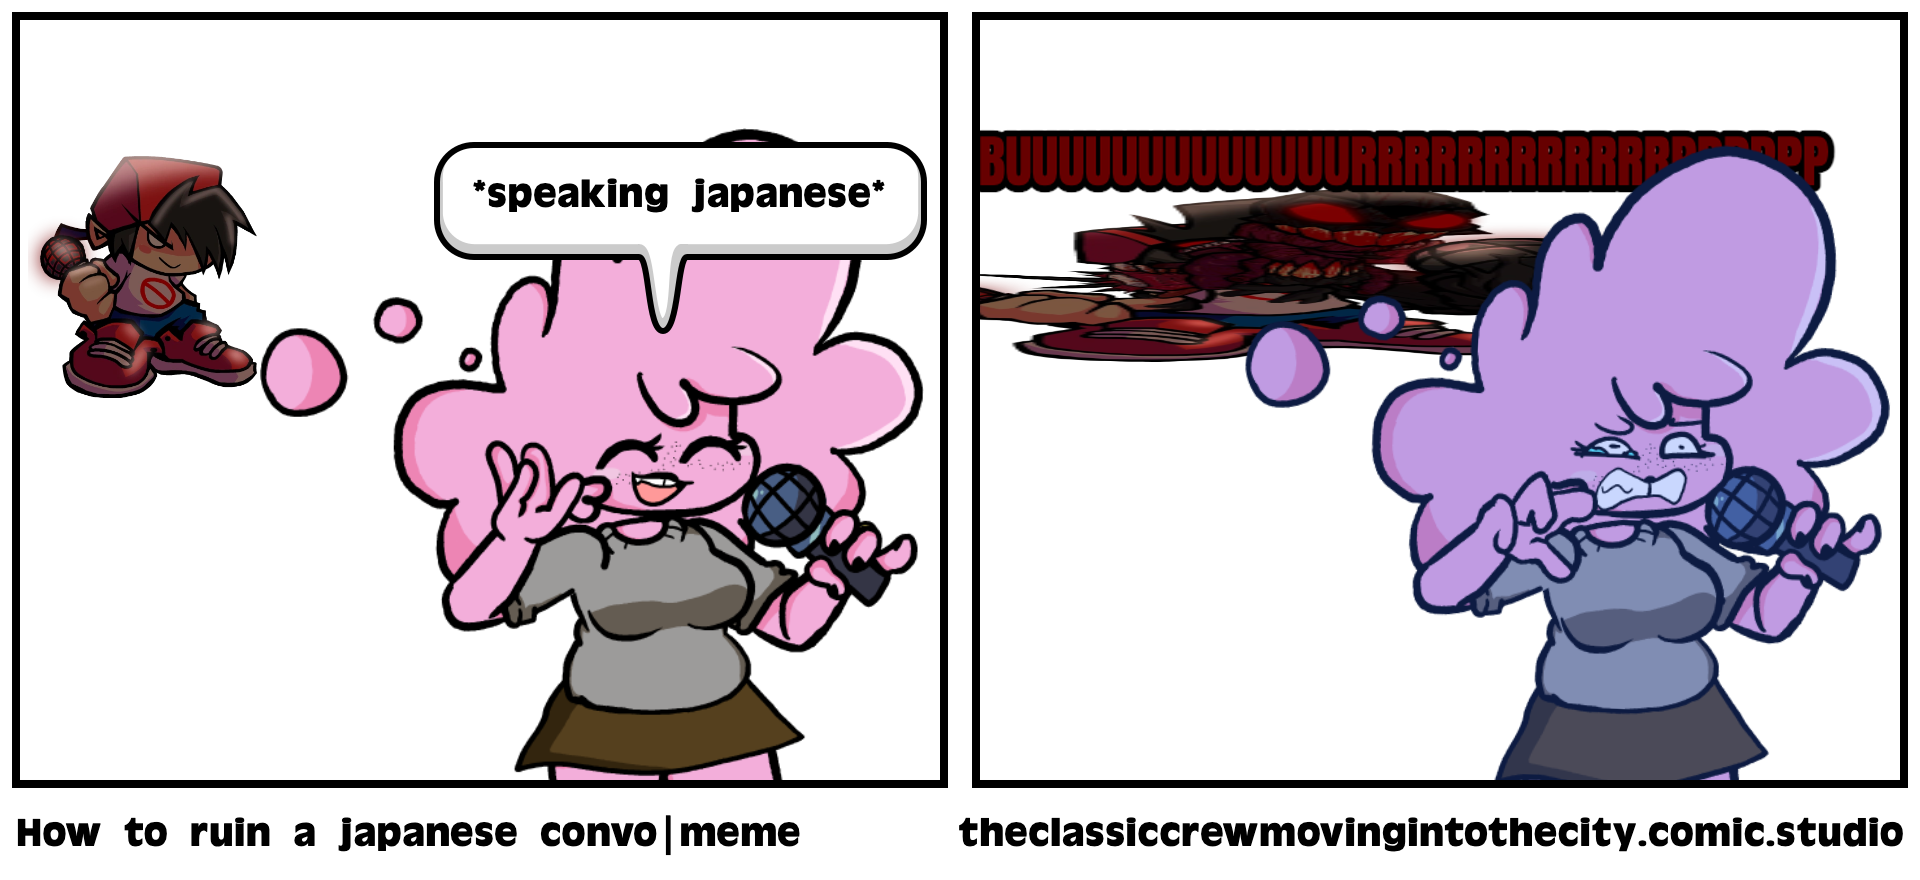 How to ruin a japanese convo|meme